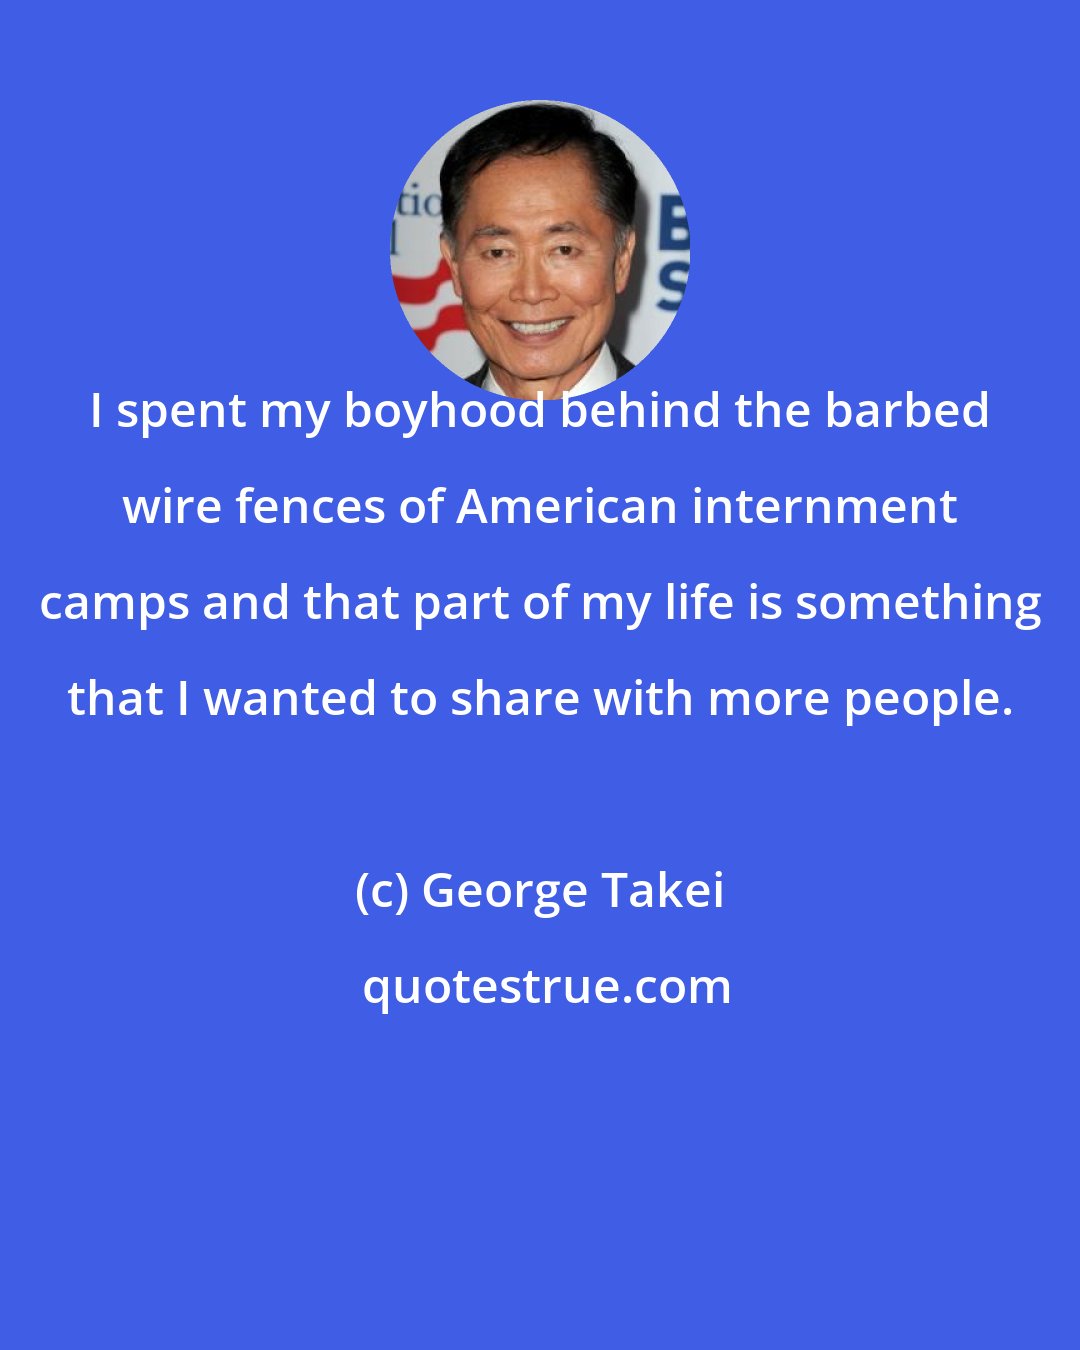 George Takei: I spent my boyhood behind the barbed wire fences of American internment camps and that part of my life is something that I wanted to share with more people.